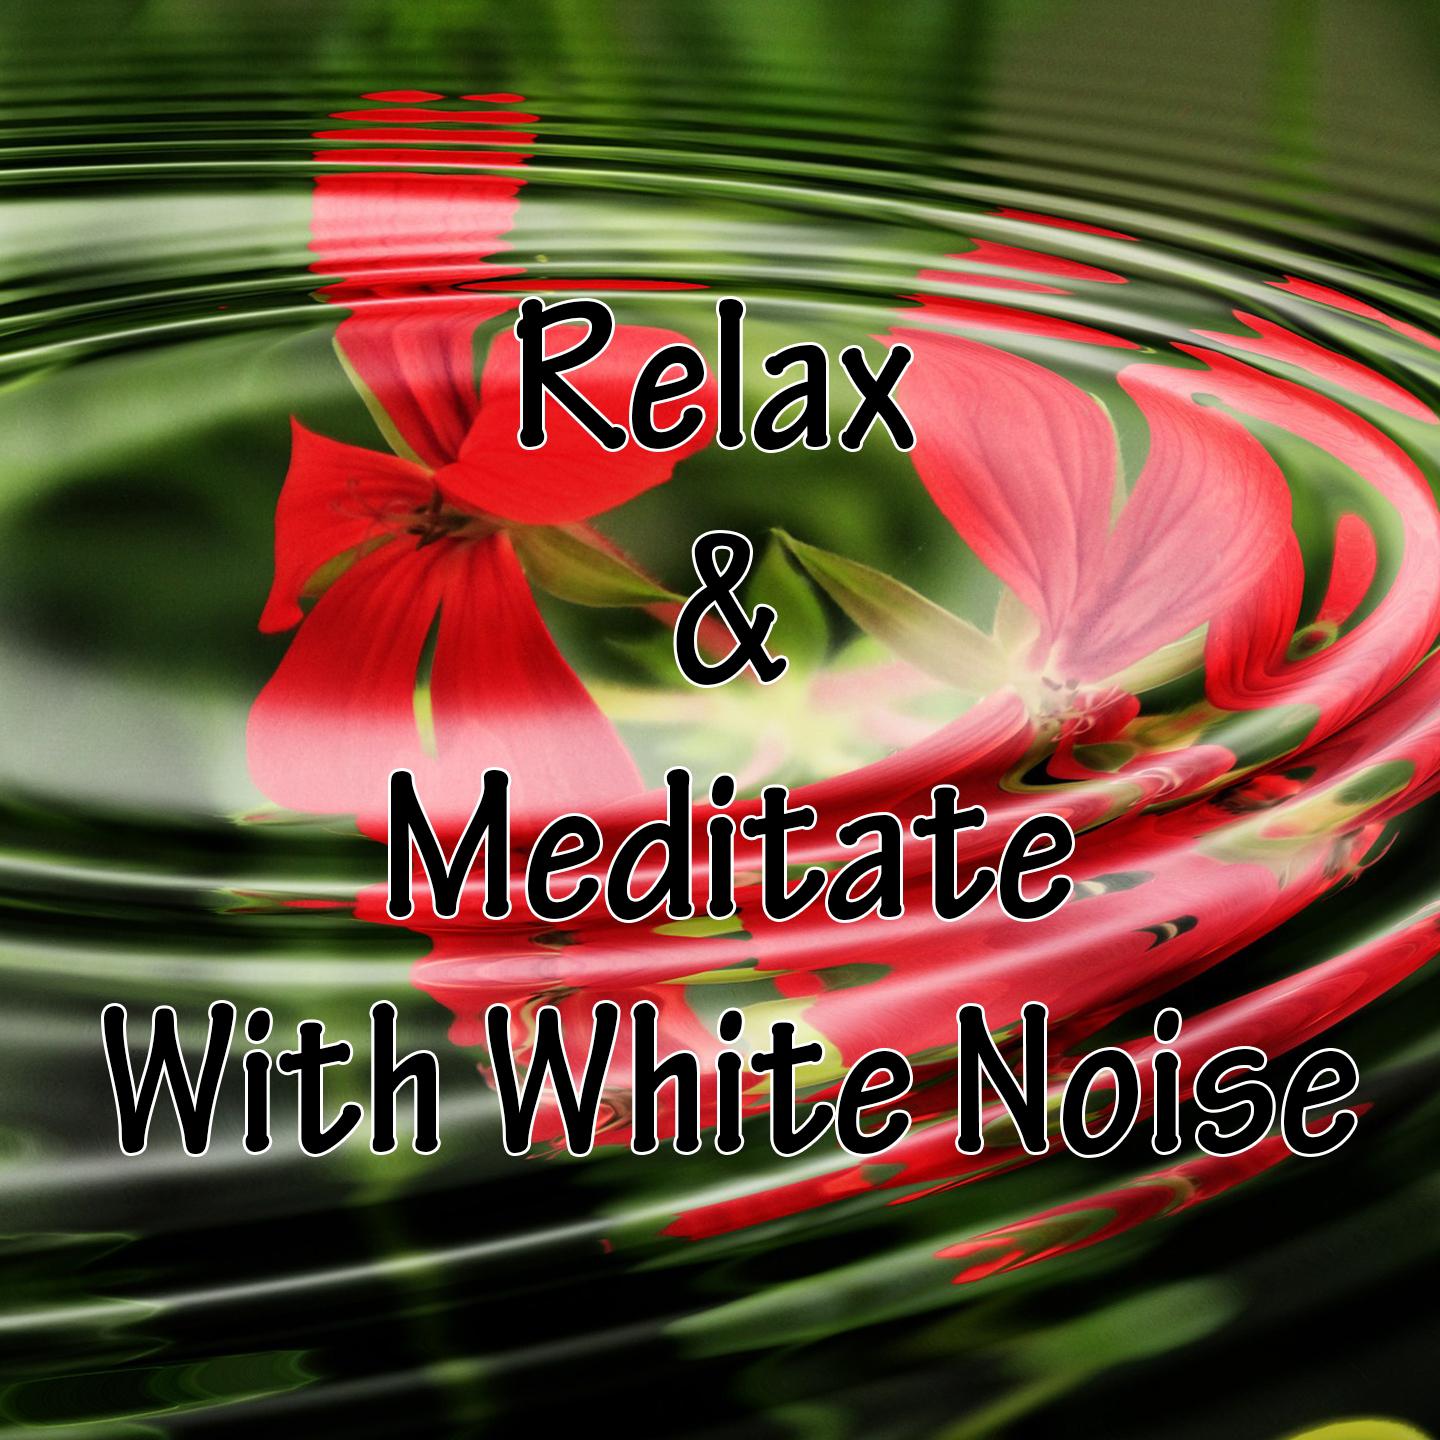 Relax & Meditate With White Noise